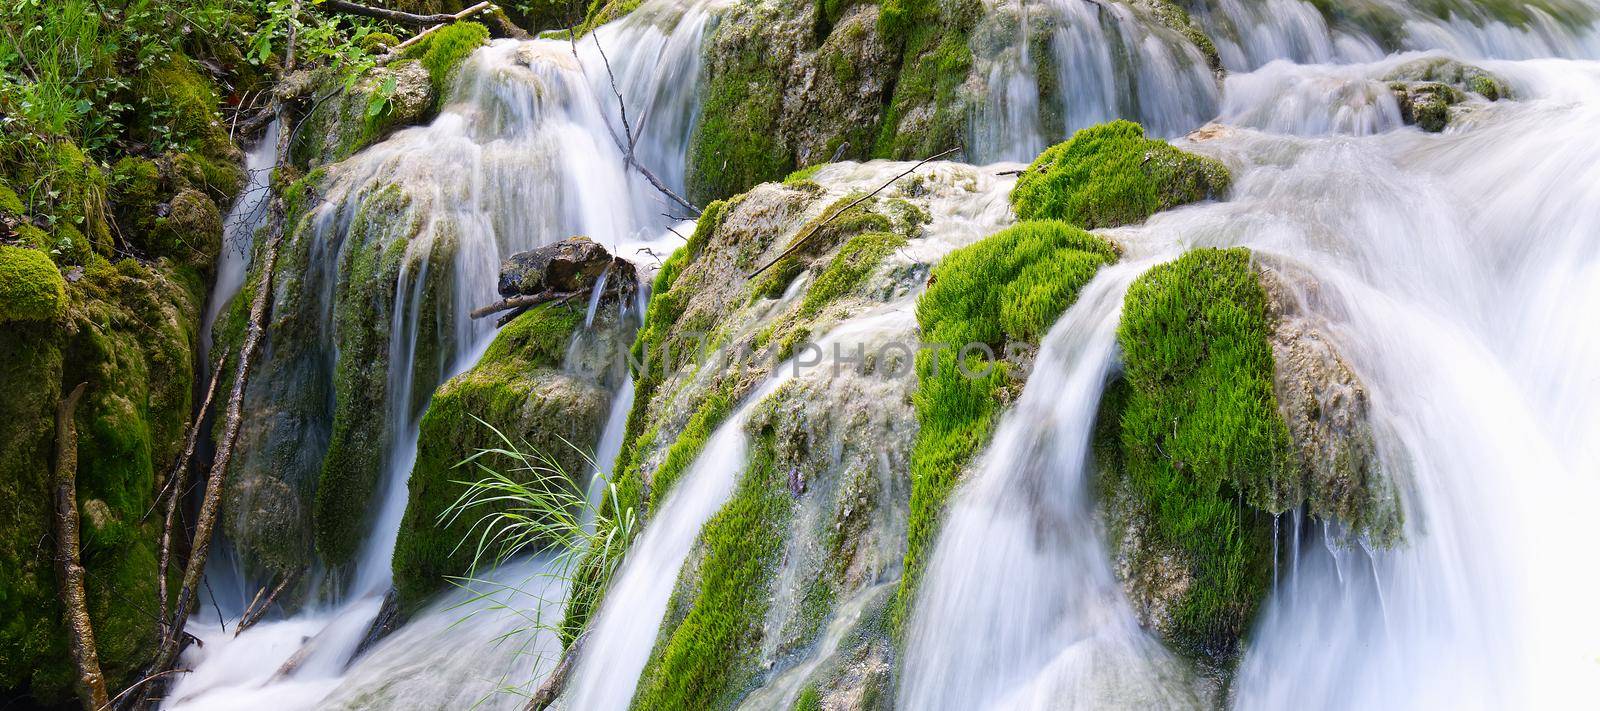 Waterfall in Plitvice Lakes national Park at summer, Croatia by PhotoTime